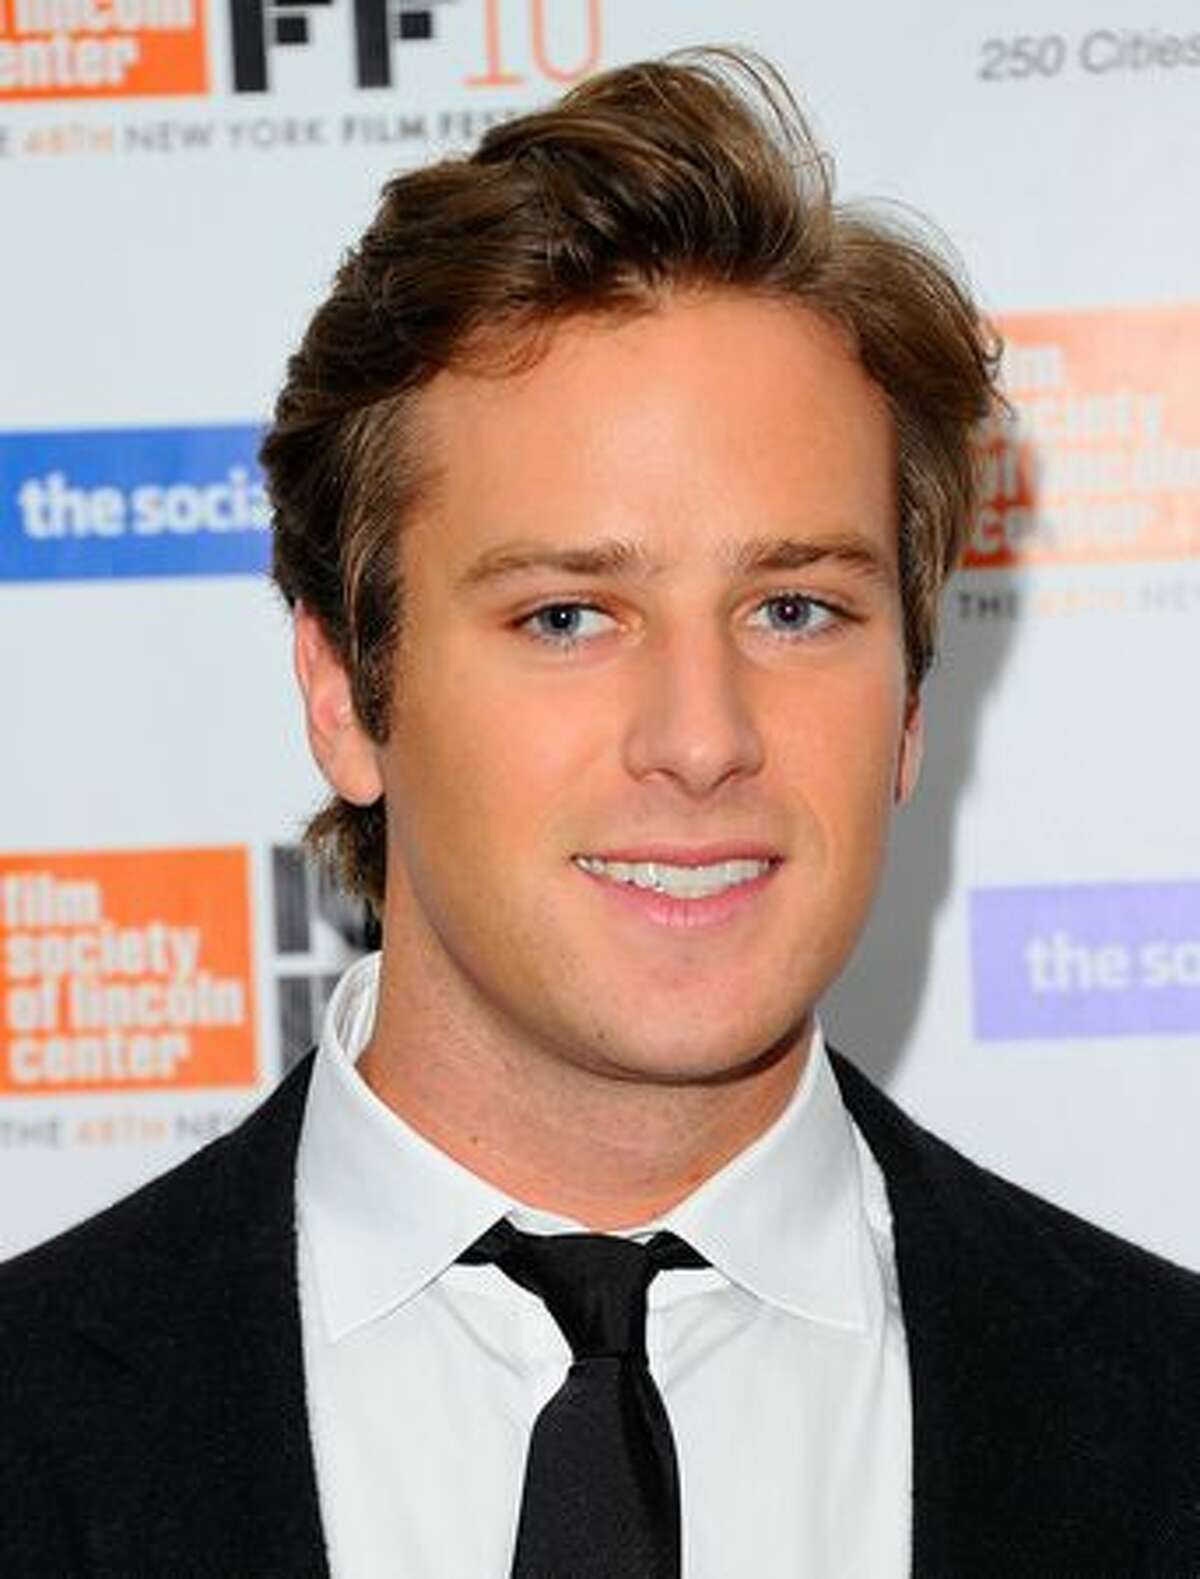 Actor Armie Hammer attends the premiere of "The Social Network" during the 48th New York Film Festival at Alice Tully Hall, Lincoln Center in New York City.